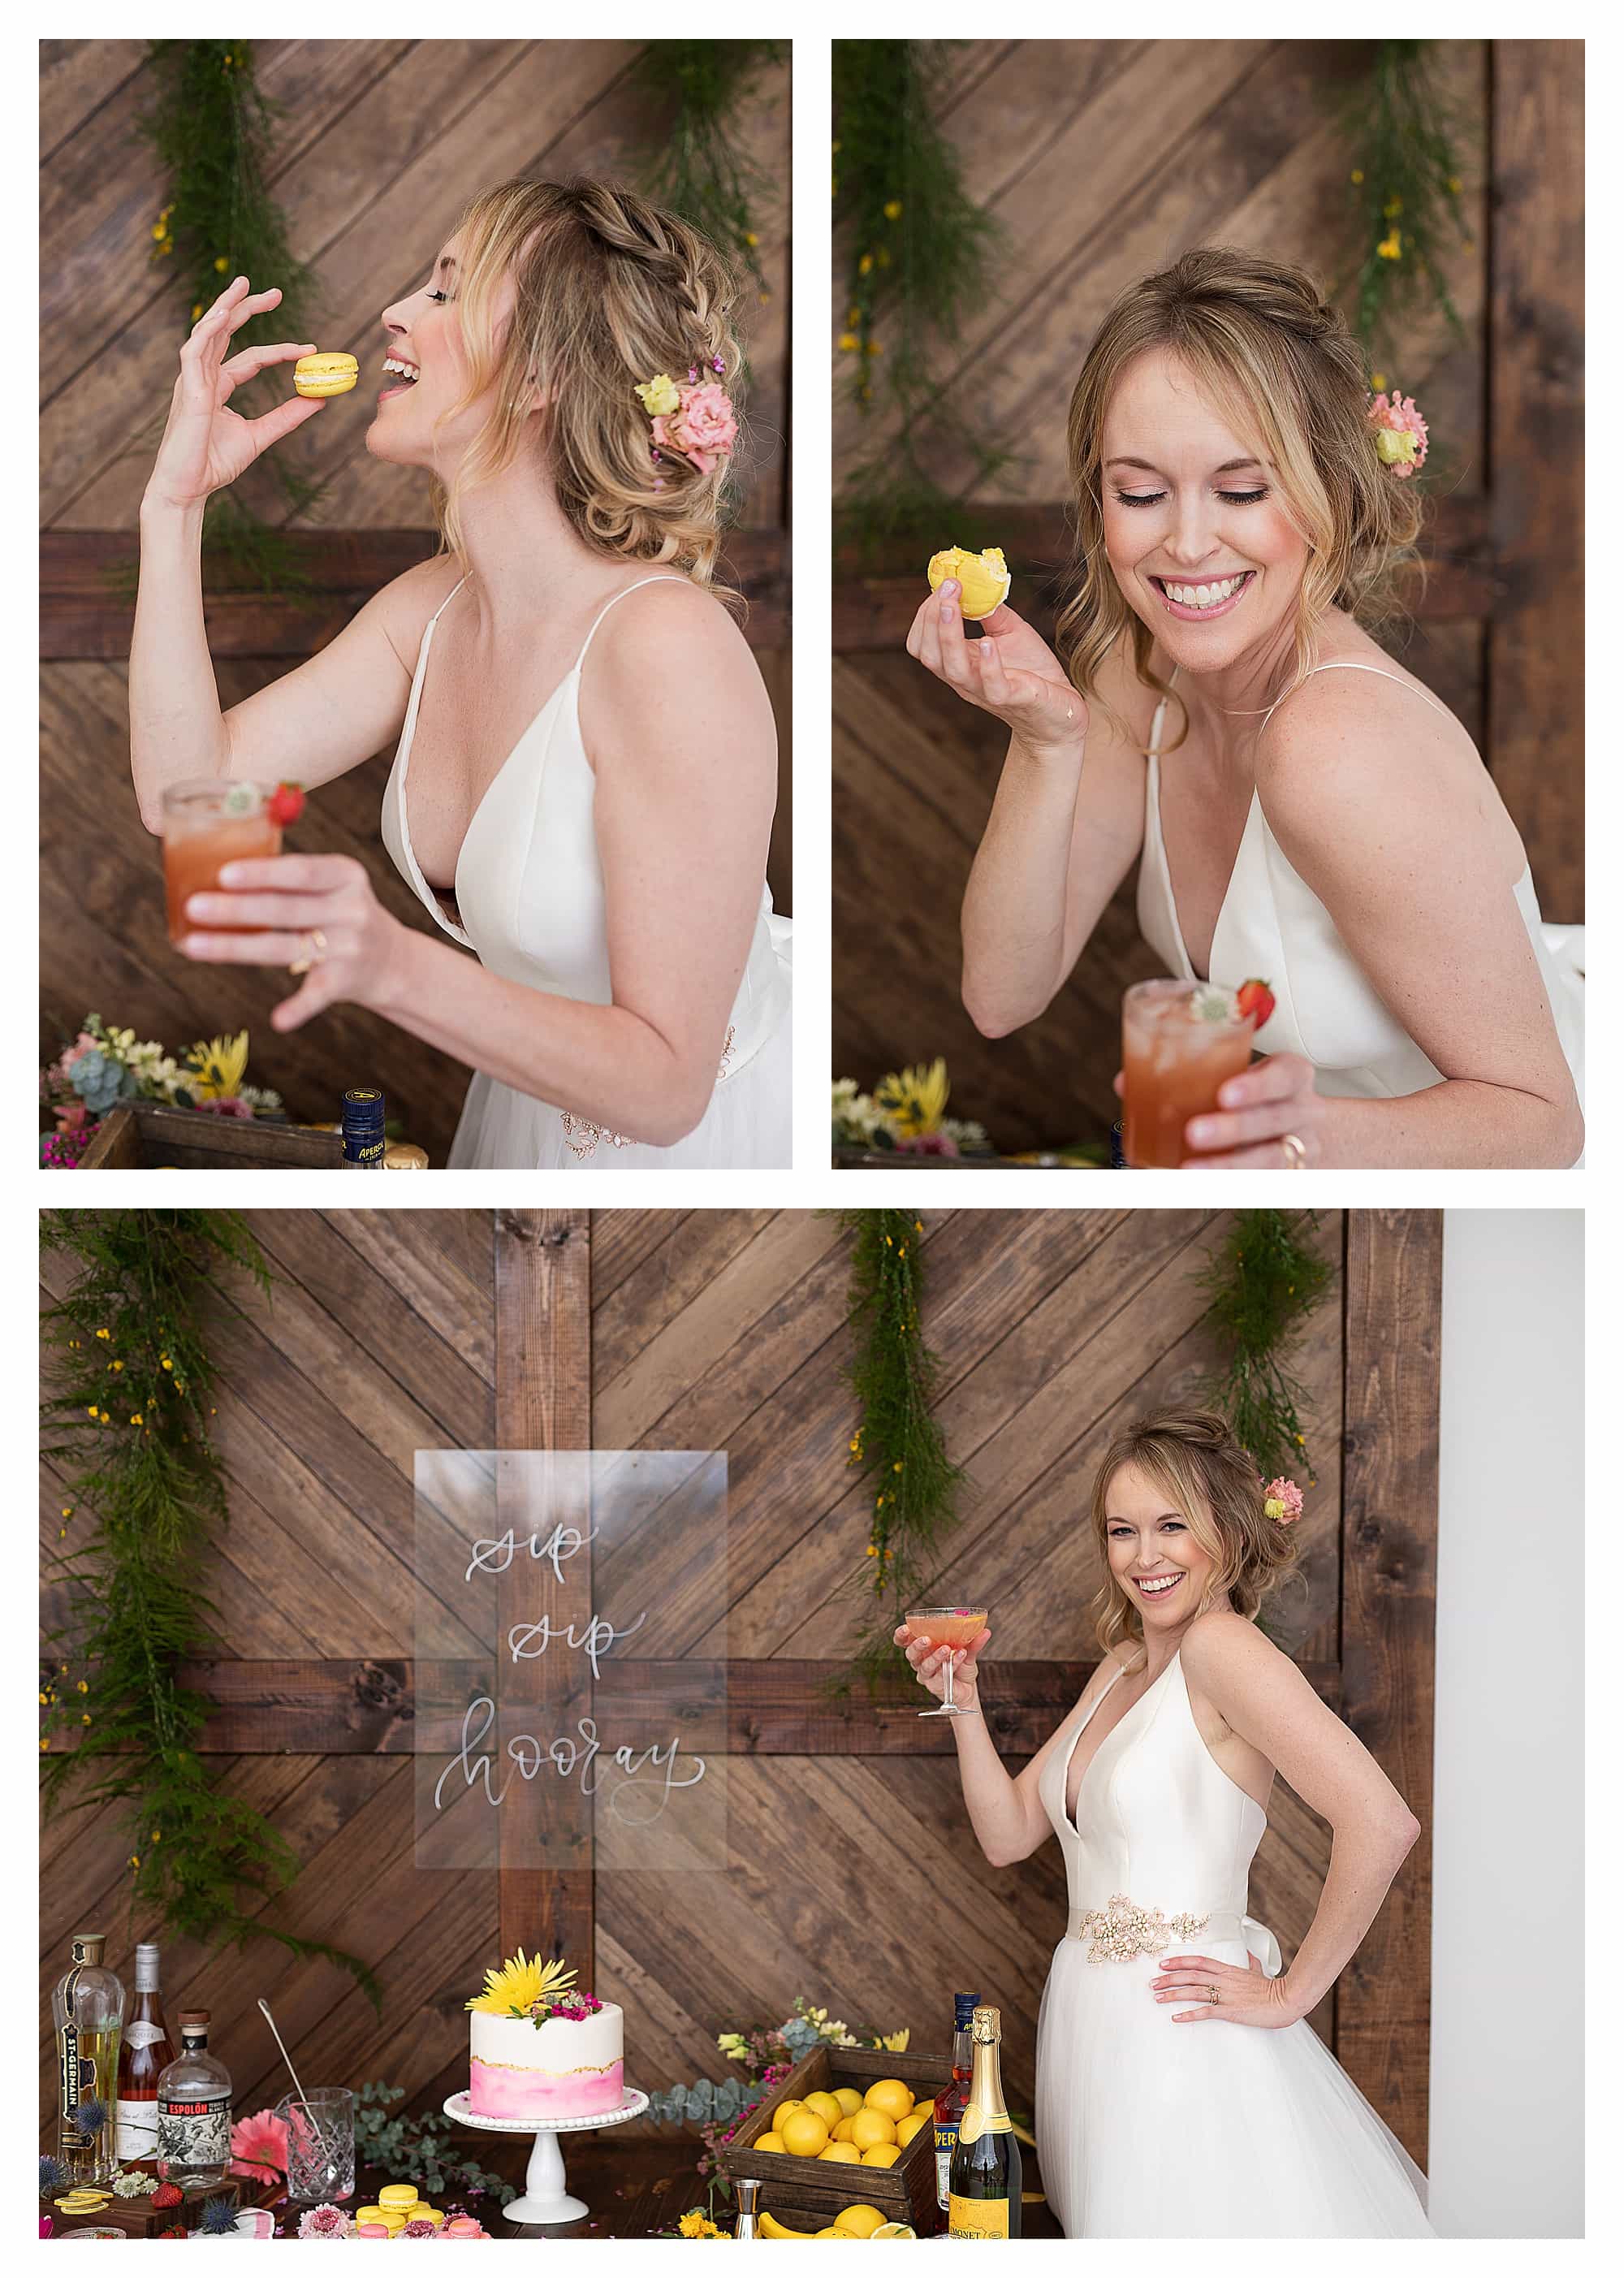 Bride in wedding dress laughing while drinking cocktail and eating yellow macarons beside beautiful wedding cake